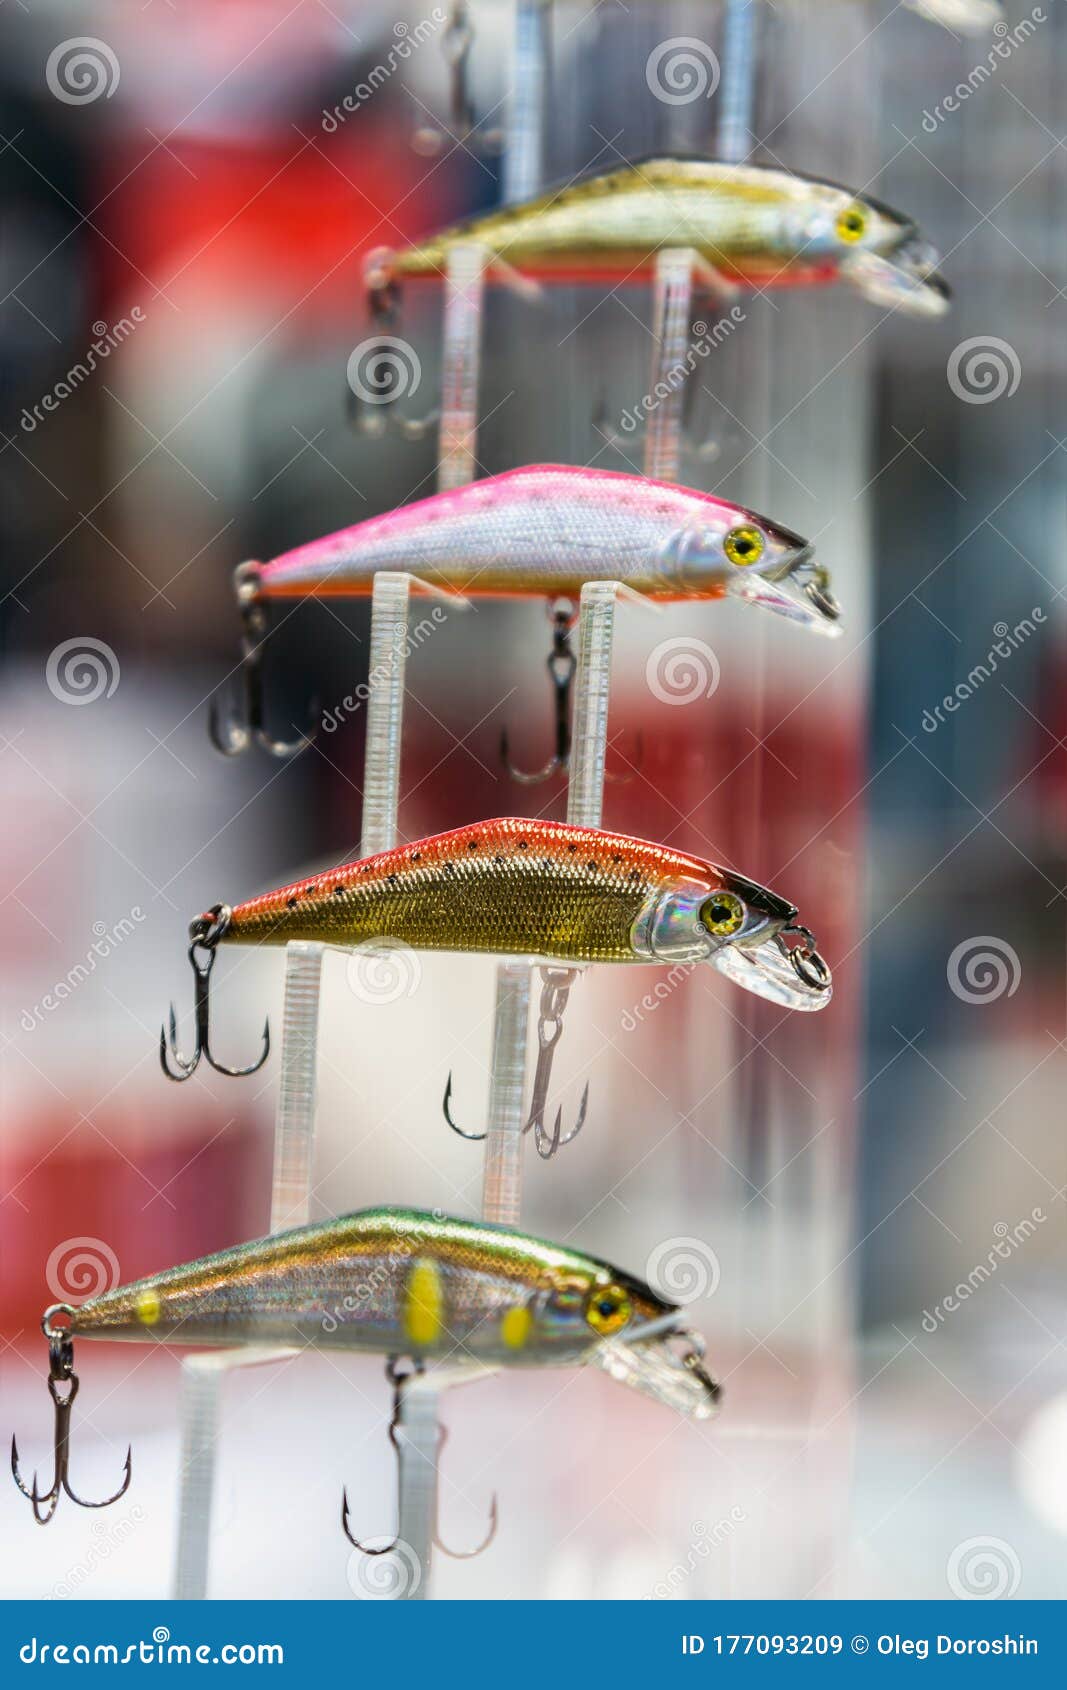 Baits Wobblers and Rolls of Different Manufacturers Stock Image - Image of  deal, life: 177093209